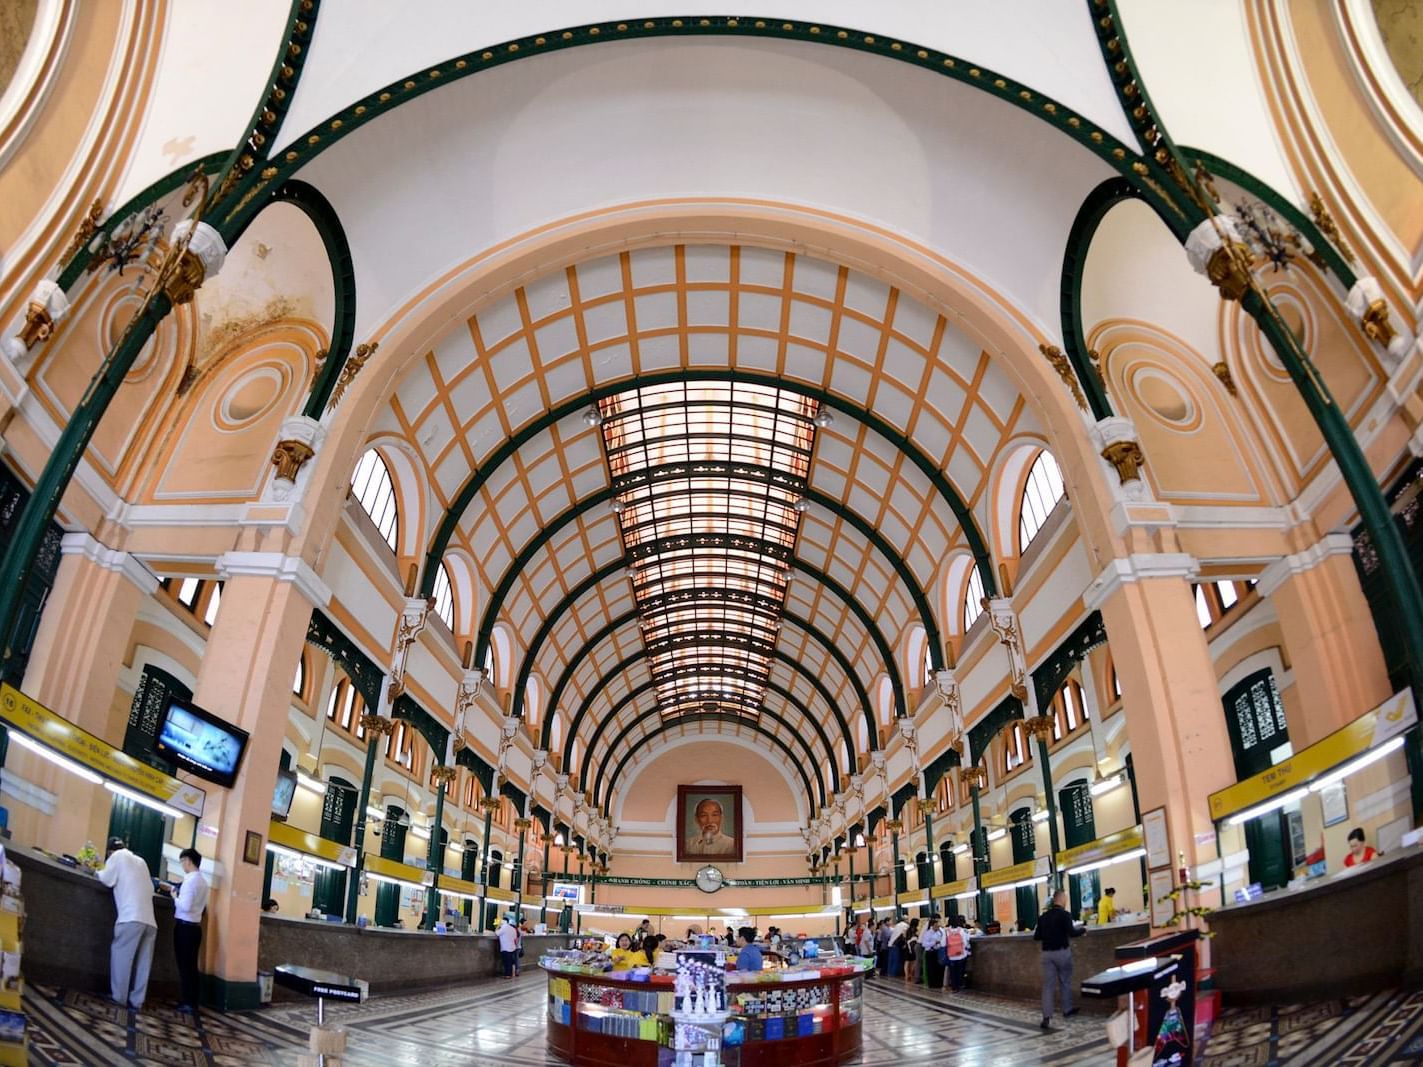 Interior view of Saigon Central Post Office near Eastin Hotels